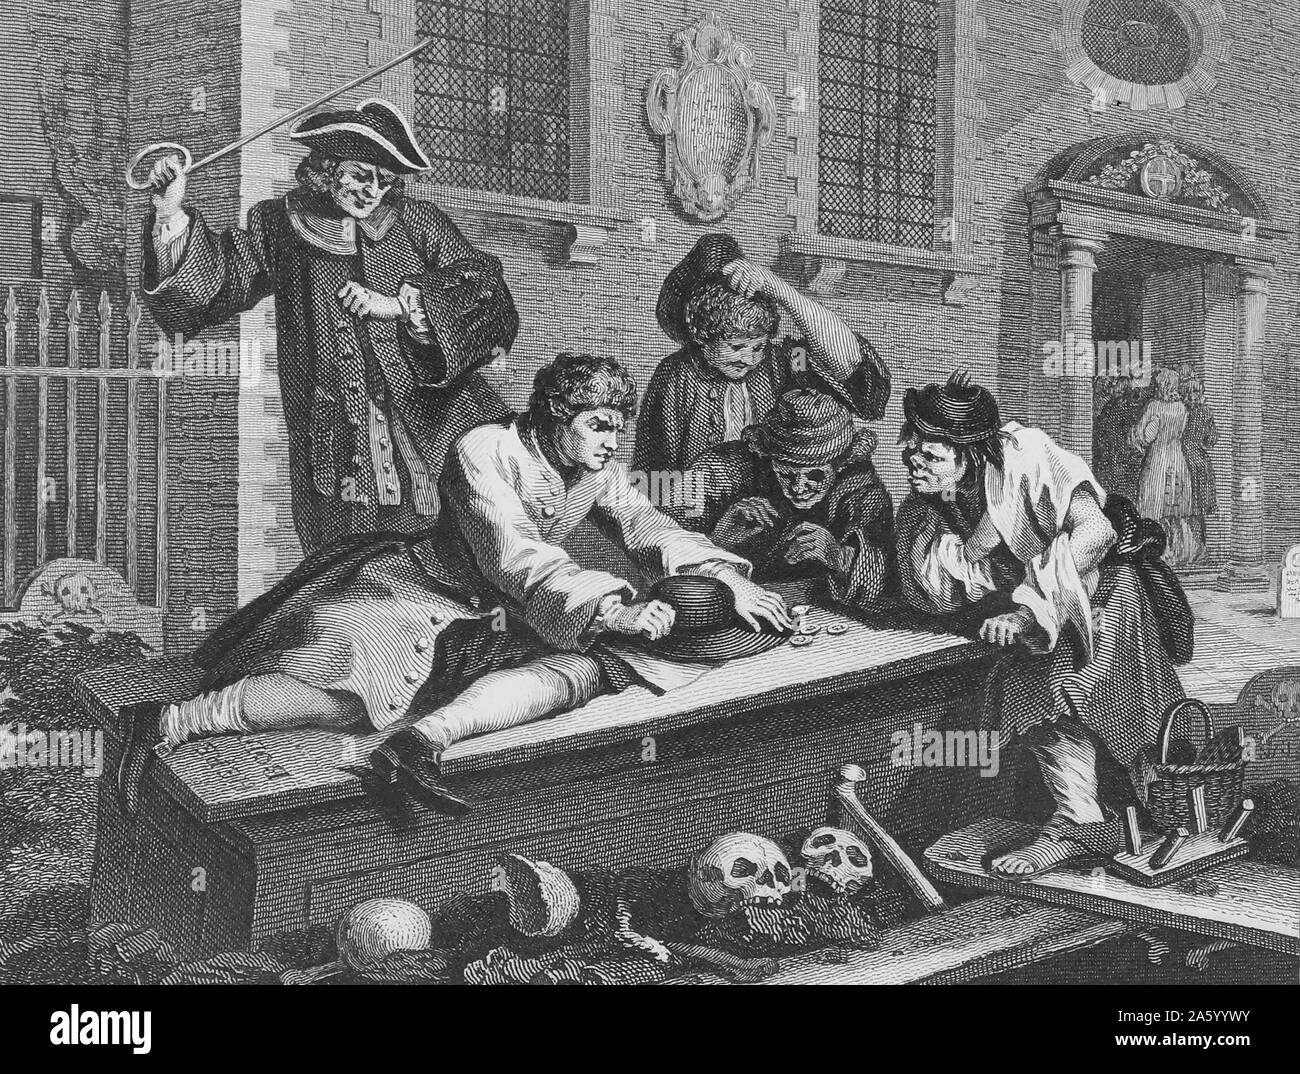 Engraving titled 'Industry and Idleness' by William Hogarth (1697-1764) English painter, printmaker, pictorial satirist, social critic, and editorial cartoonist who has been credited with pioneering western sequential art. Dated 18th Century. Stock Photo